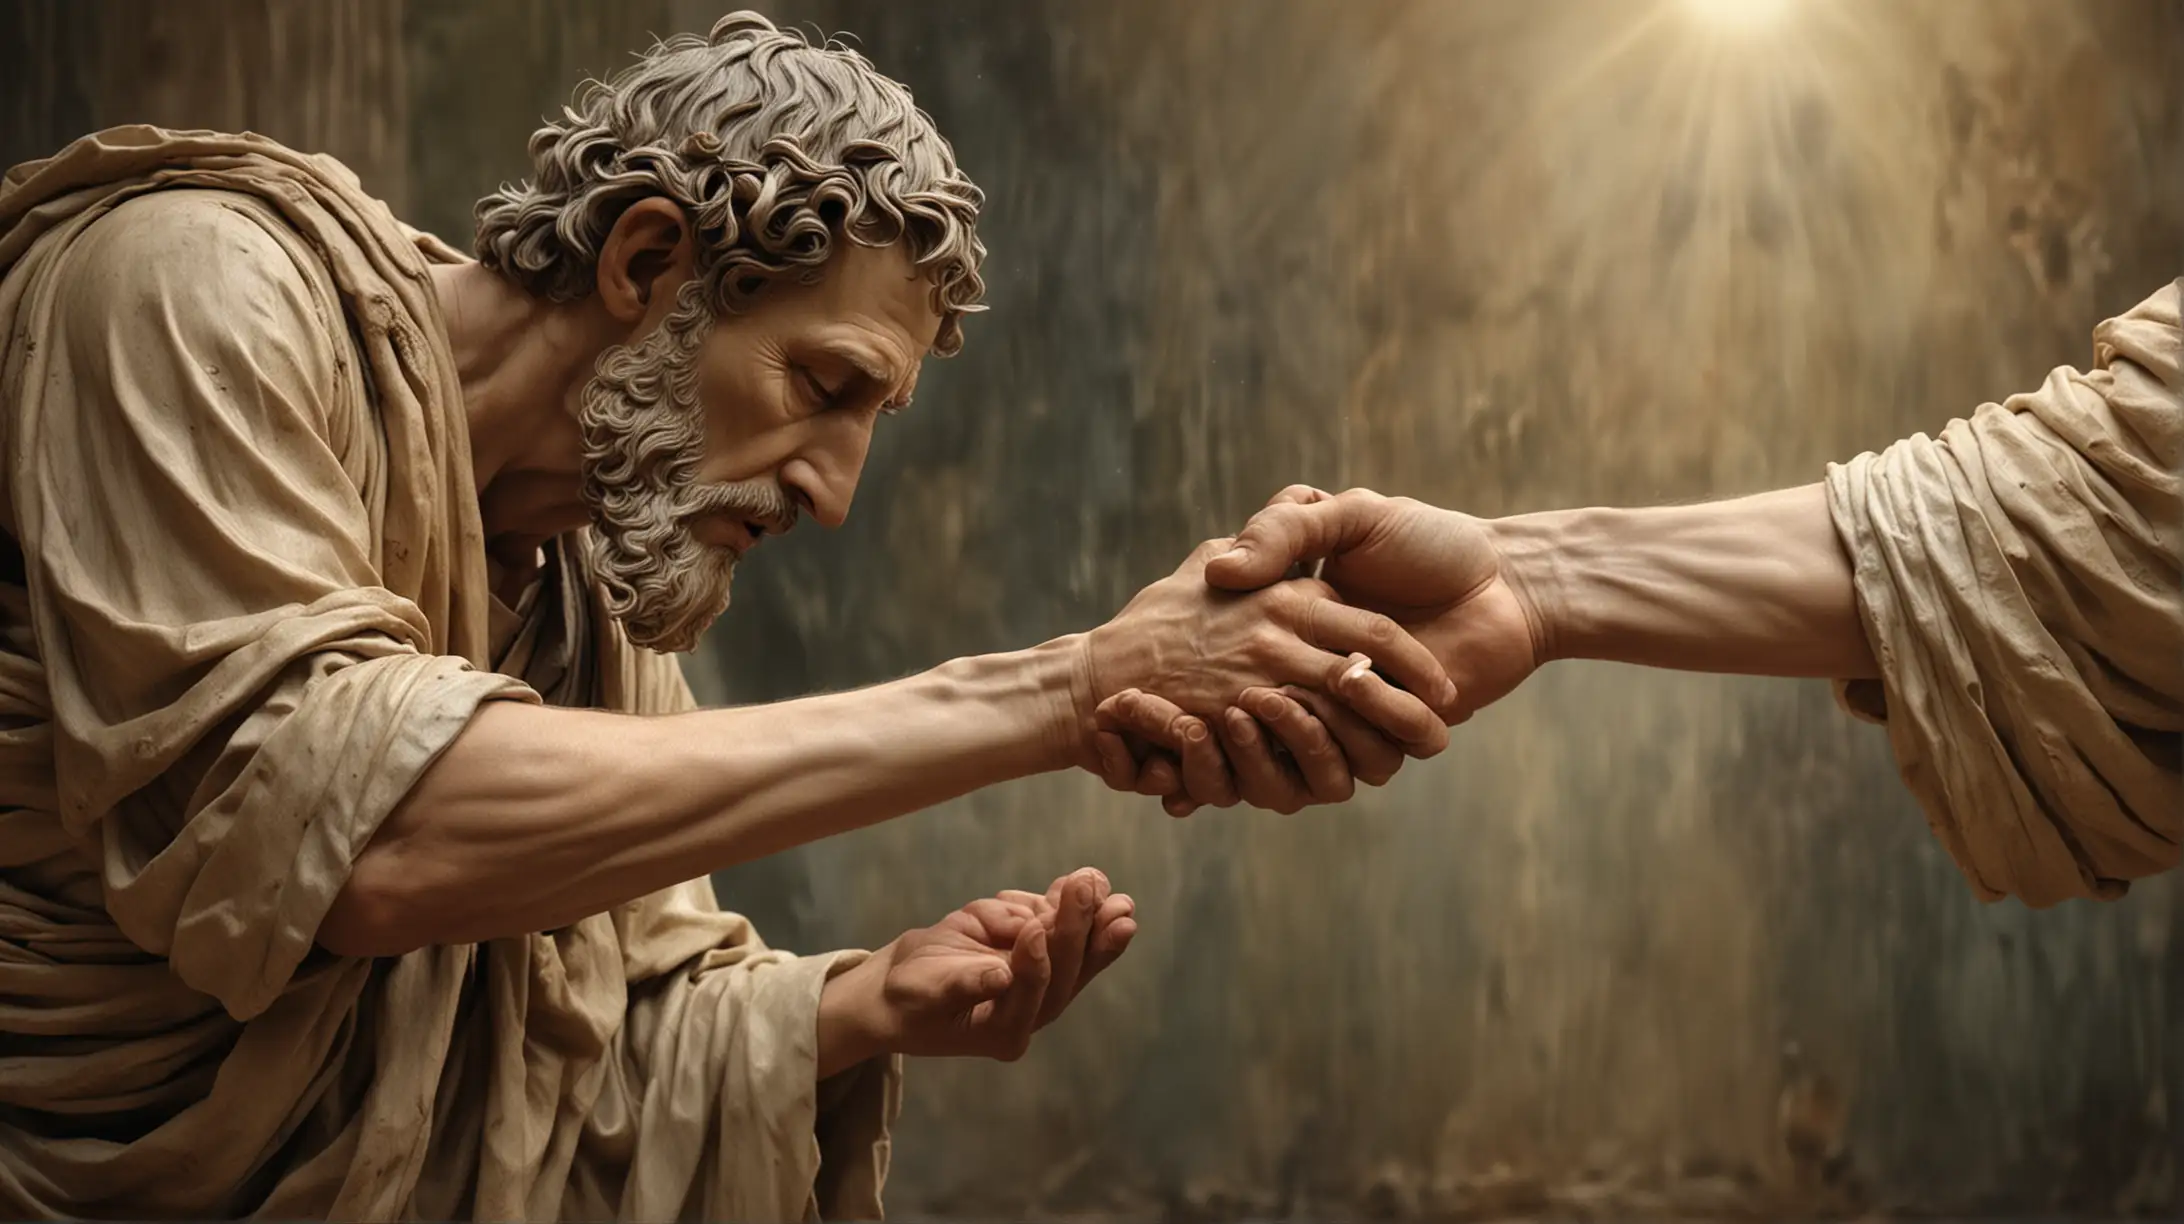 Create visuals of a stoic philosopher offering a helping hand to those in need, embodying the stoic virtue of compassion and altruism.
Description: In this touching scene, a stoic philosopher is depicted extending a hand of assistance to a person in distress, offering comfort and support in their time of need. His expression is compassionate and empathetic, reflecting his genuine concern for the well-being of others. This image exemplifies the stoic ideal of practicing kindness and generosity towards fellow human beings, regardless of their circumstances.